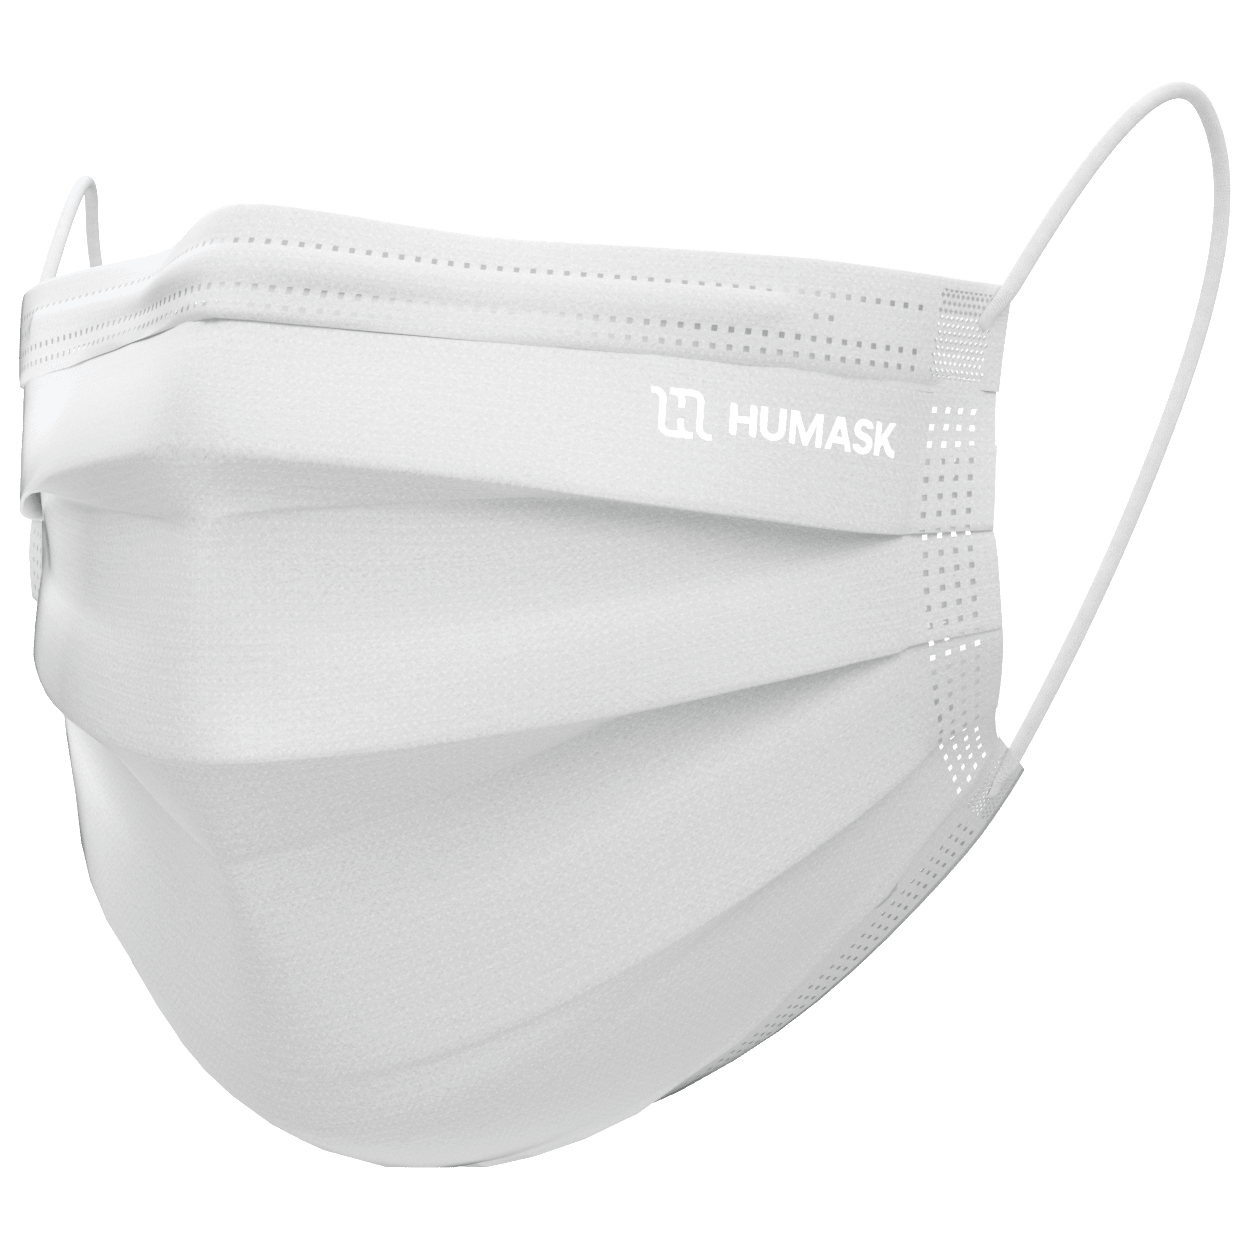 Humask masque procédure jetables adulte blanc compagnie canadienne